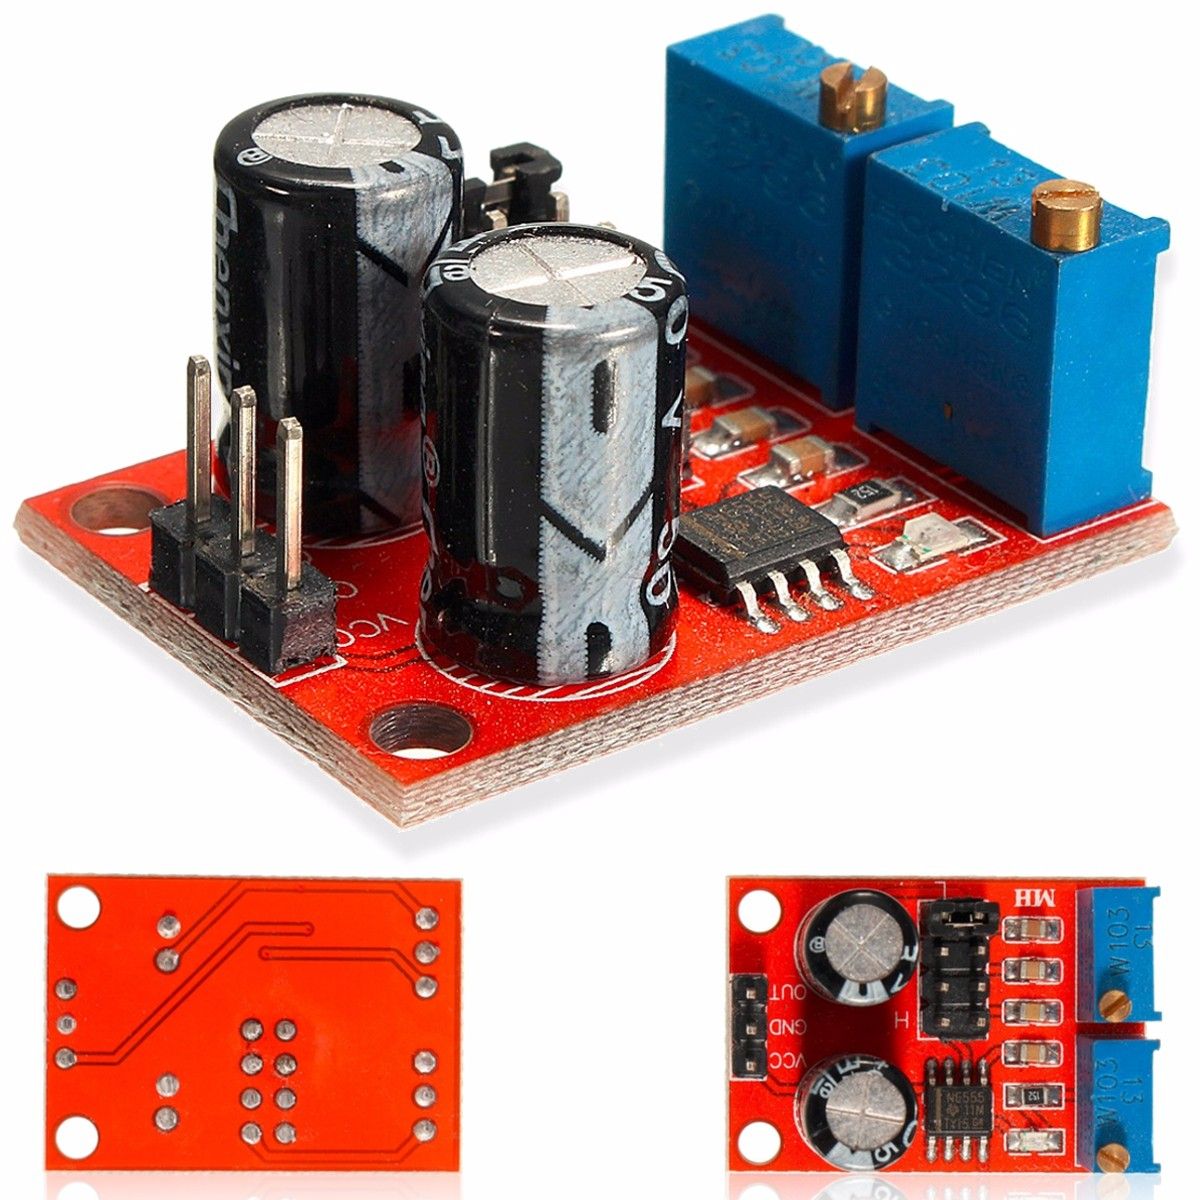 5Pcs-NE555-Pulse-Frequency-Duty-Cycle-Adjustable-Module-Square-Wave-Signal-Generator-1067375